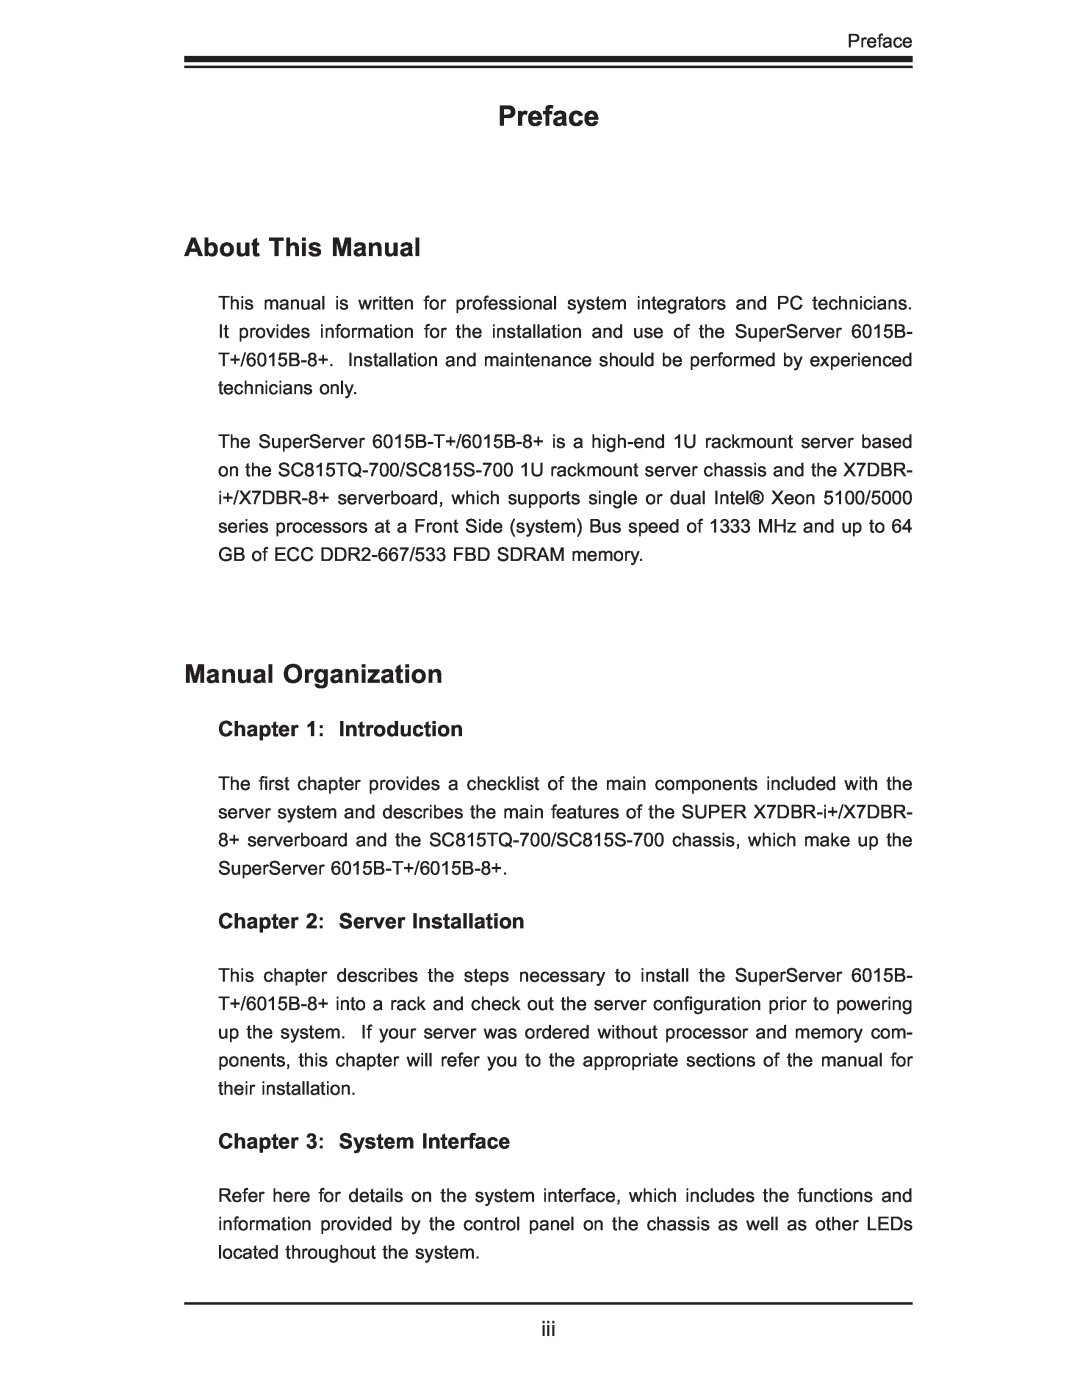 SUPER MICRO Computer 6015B-8+ manual Preface, About This Manual, Manual Organization, Introduction, Server Installation 